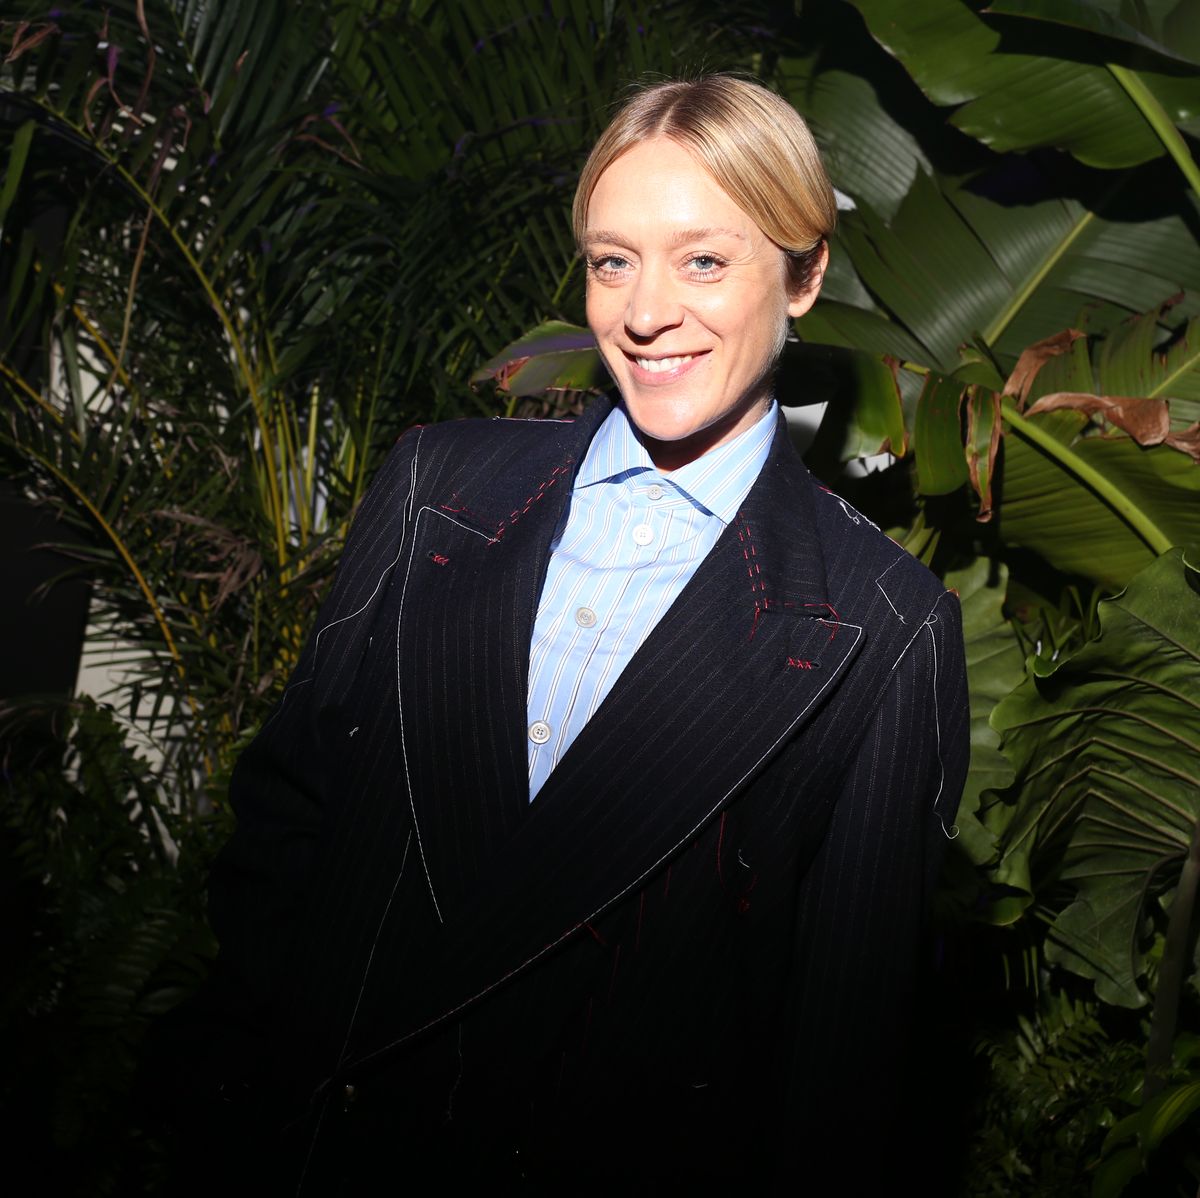 Chloë Sevigny Had a Rummage Sale. Demand Was Off the Hook.